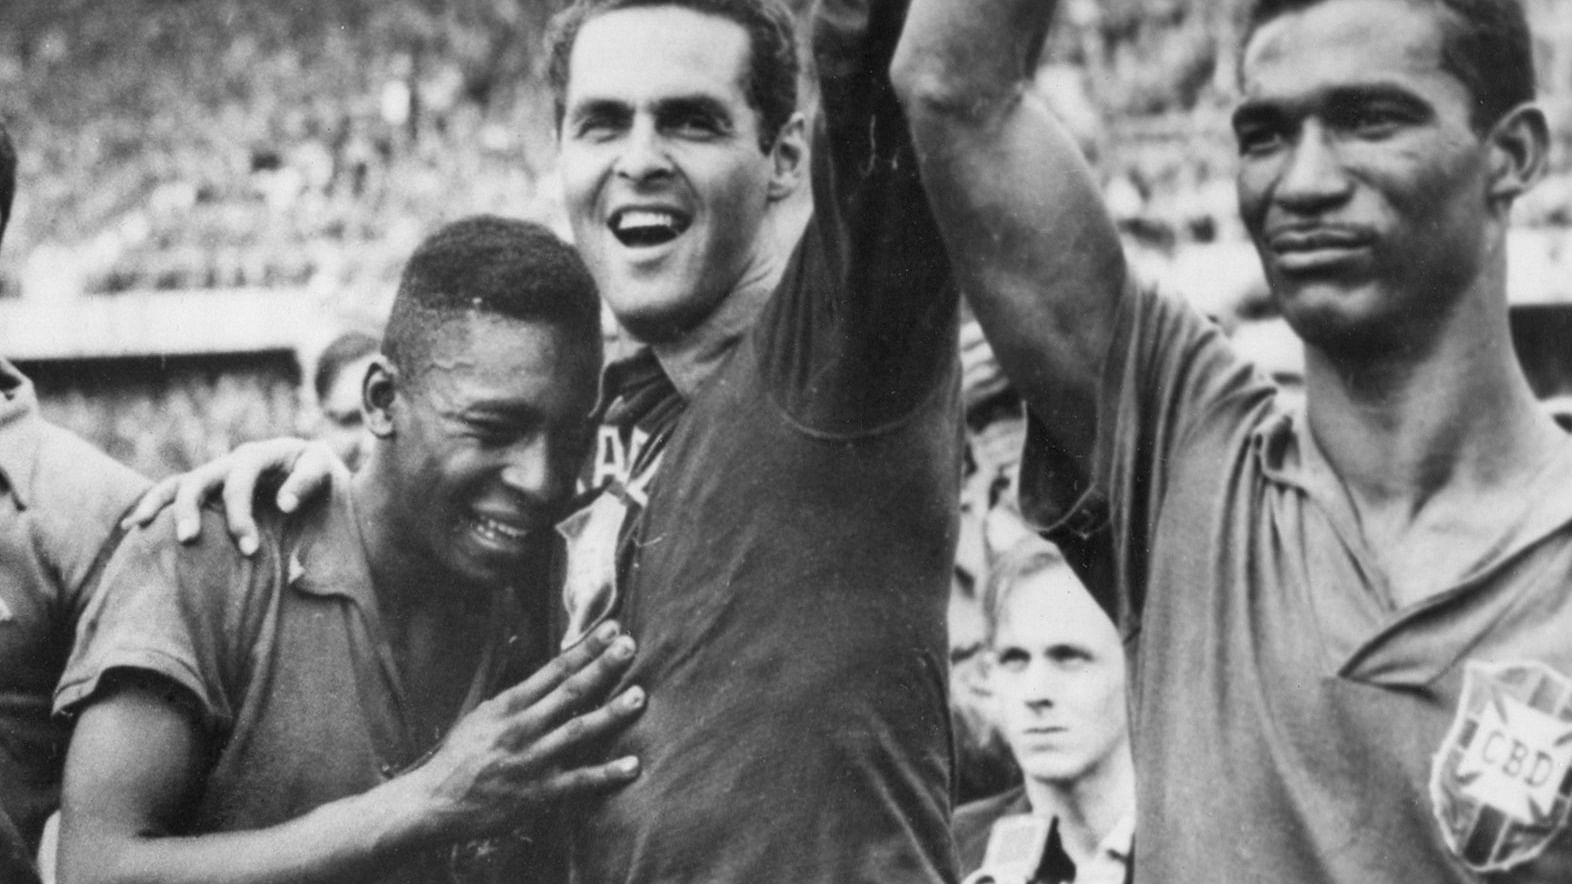 In this June 29, 1958 file photo Brazil’s 17-year-old Pele, left, weeps on the shoulder of goalkeeper Gilmar Dos Santos Neves, after Brazil’s 5-2 victory over Sweden in the World Cup final soccer match, in Stockholm, Sweden. Brazil’s Didi is at right. Pele scored twice in that final.&nbsp;